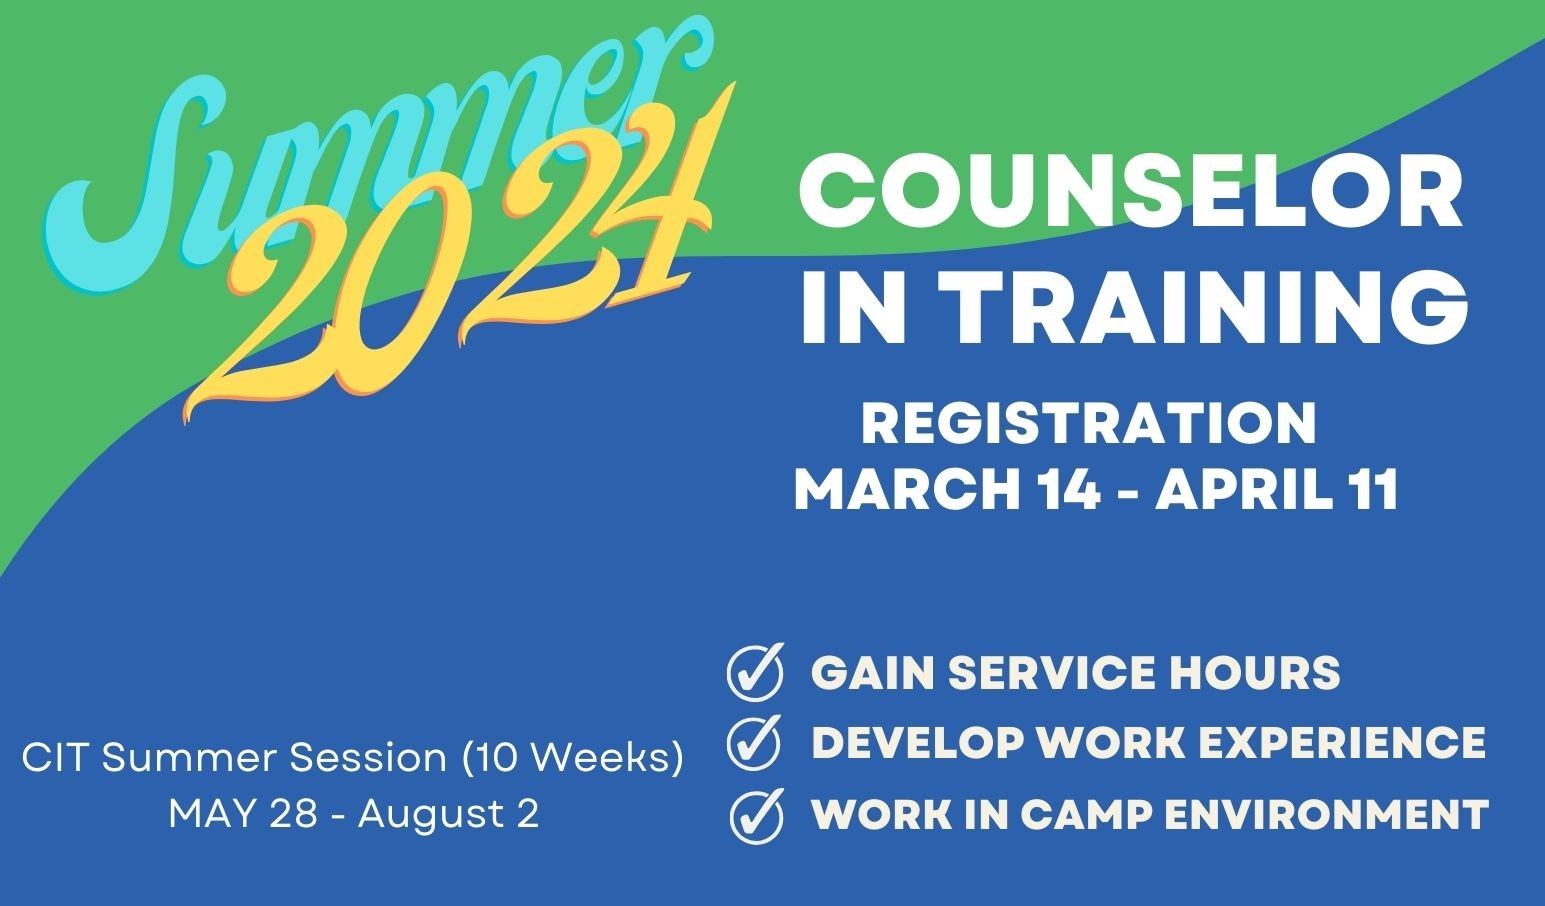 Summer 2024 Counselor In Training Registration Starts March 14 through April 11. The program starts May 28 and ends on August 2, 2024. Gain service hours, develop work experience and work in a camp environment.